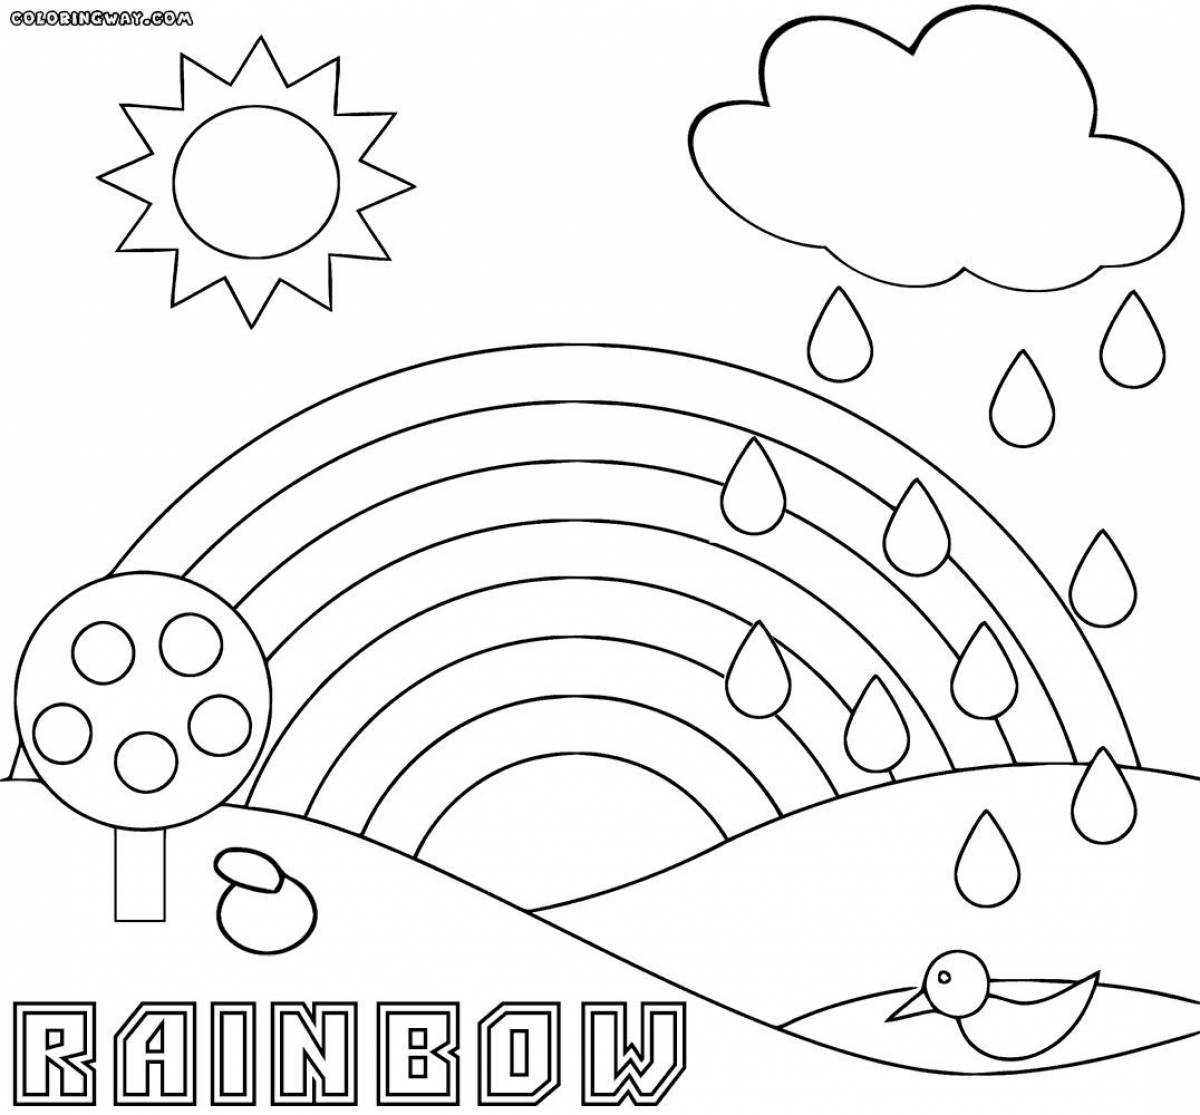 Shining rainbow coloring book for 5-6 year olds